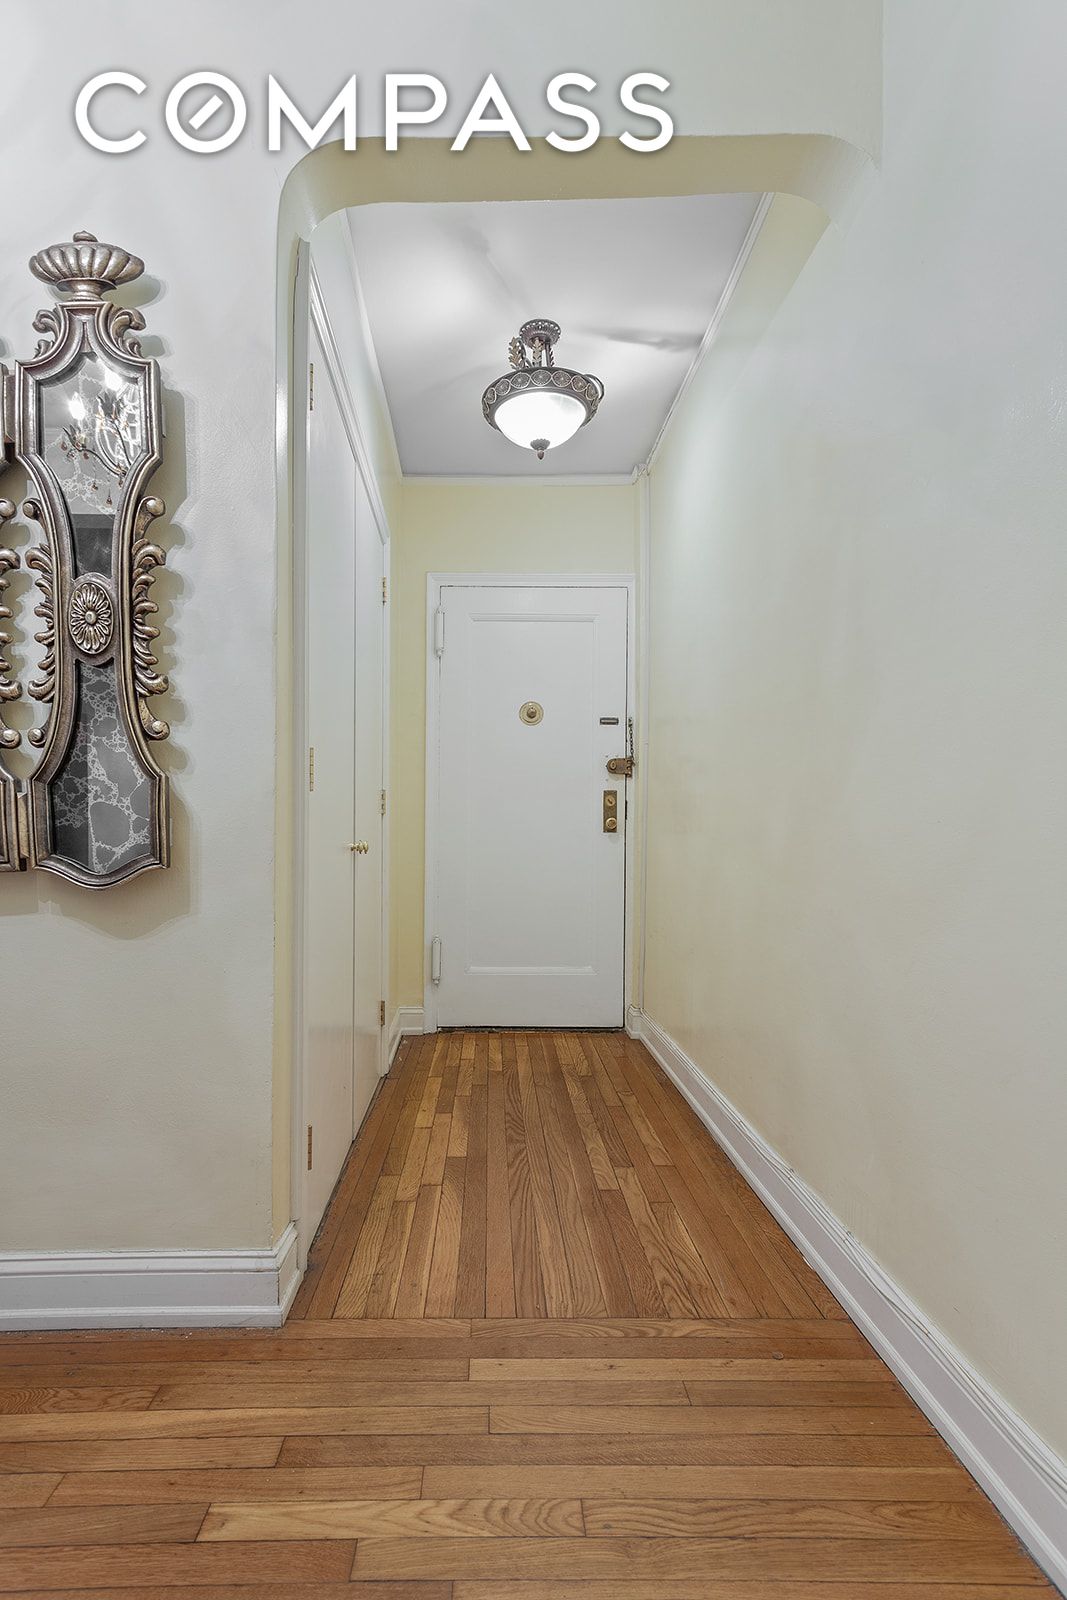 76-12 35th Avenue 2-B Jackson Heights Queens, NY 11372